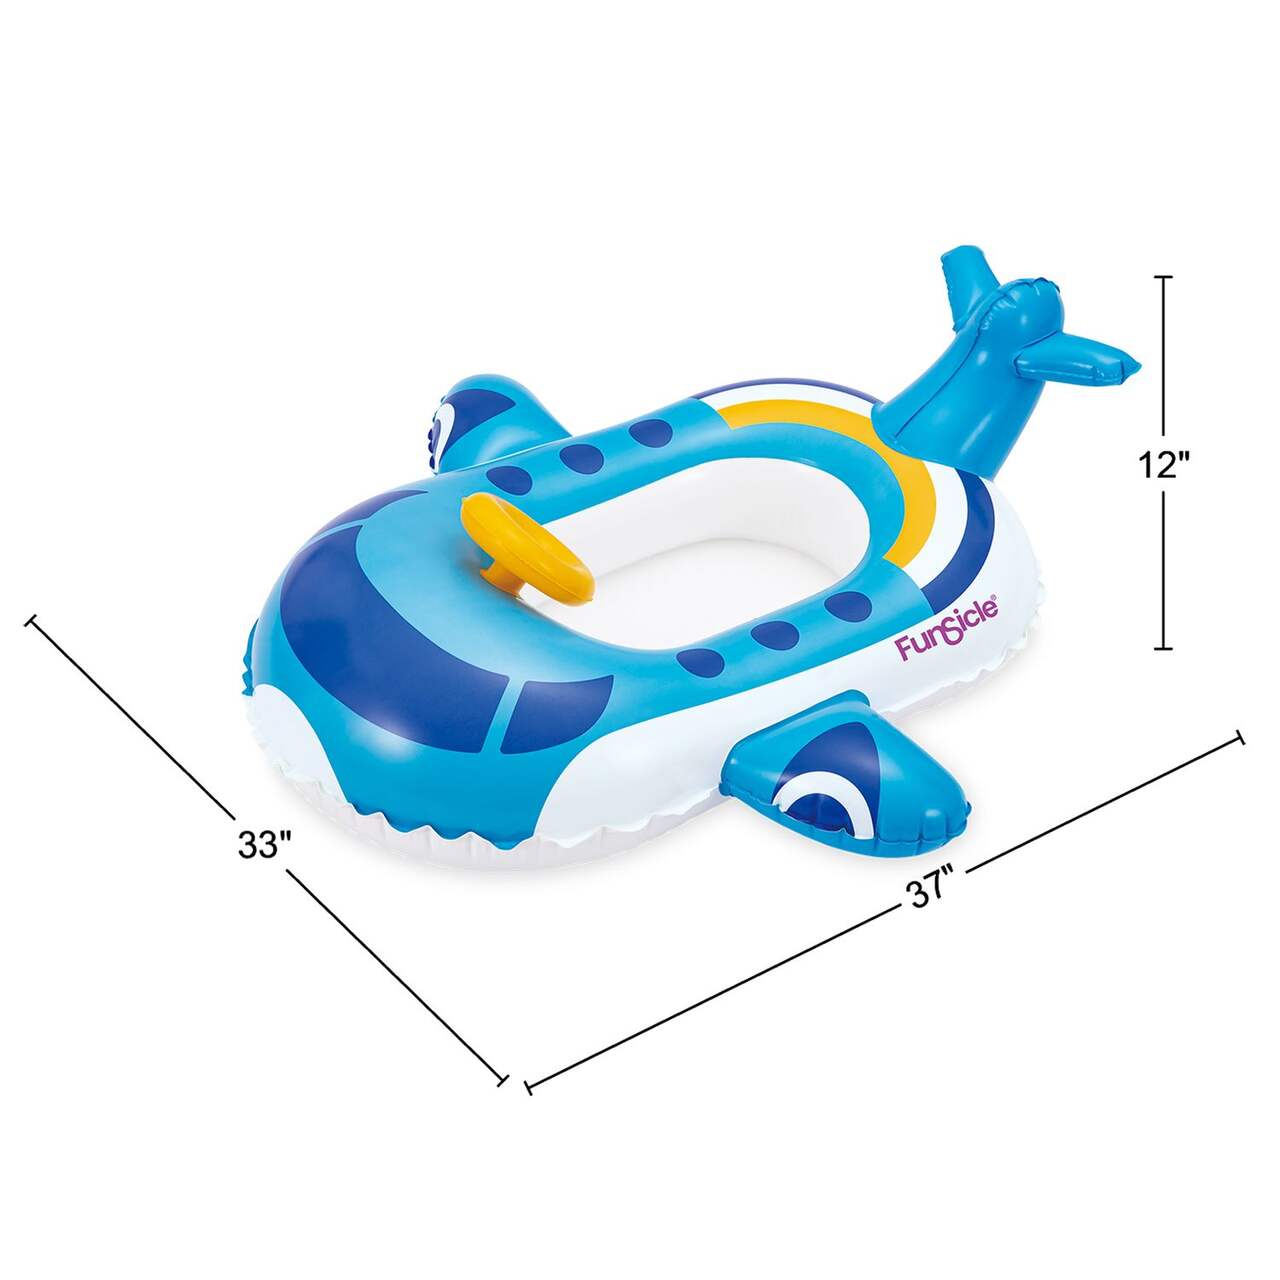 Agglo Kids' Floating Plastic Boat Water Toy For Beach/Pool/Bath